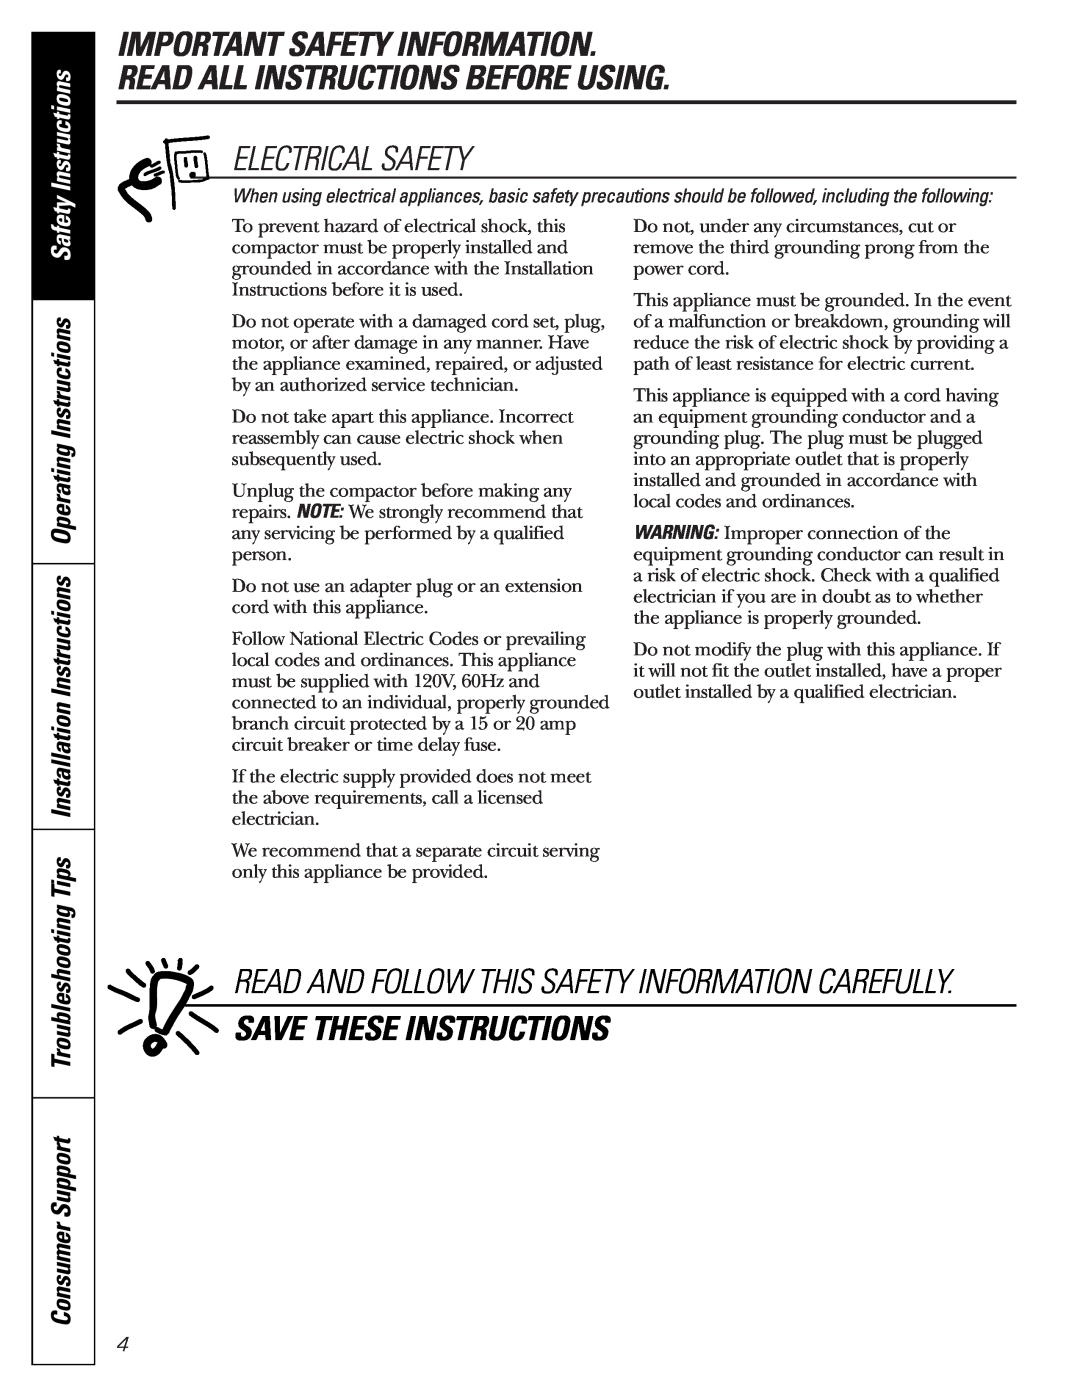 GE GCG1520 Electrical Safety, Save These Instructions, Consumer Support Troubleshooting, Important Safety Information 